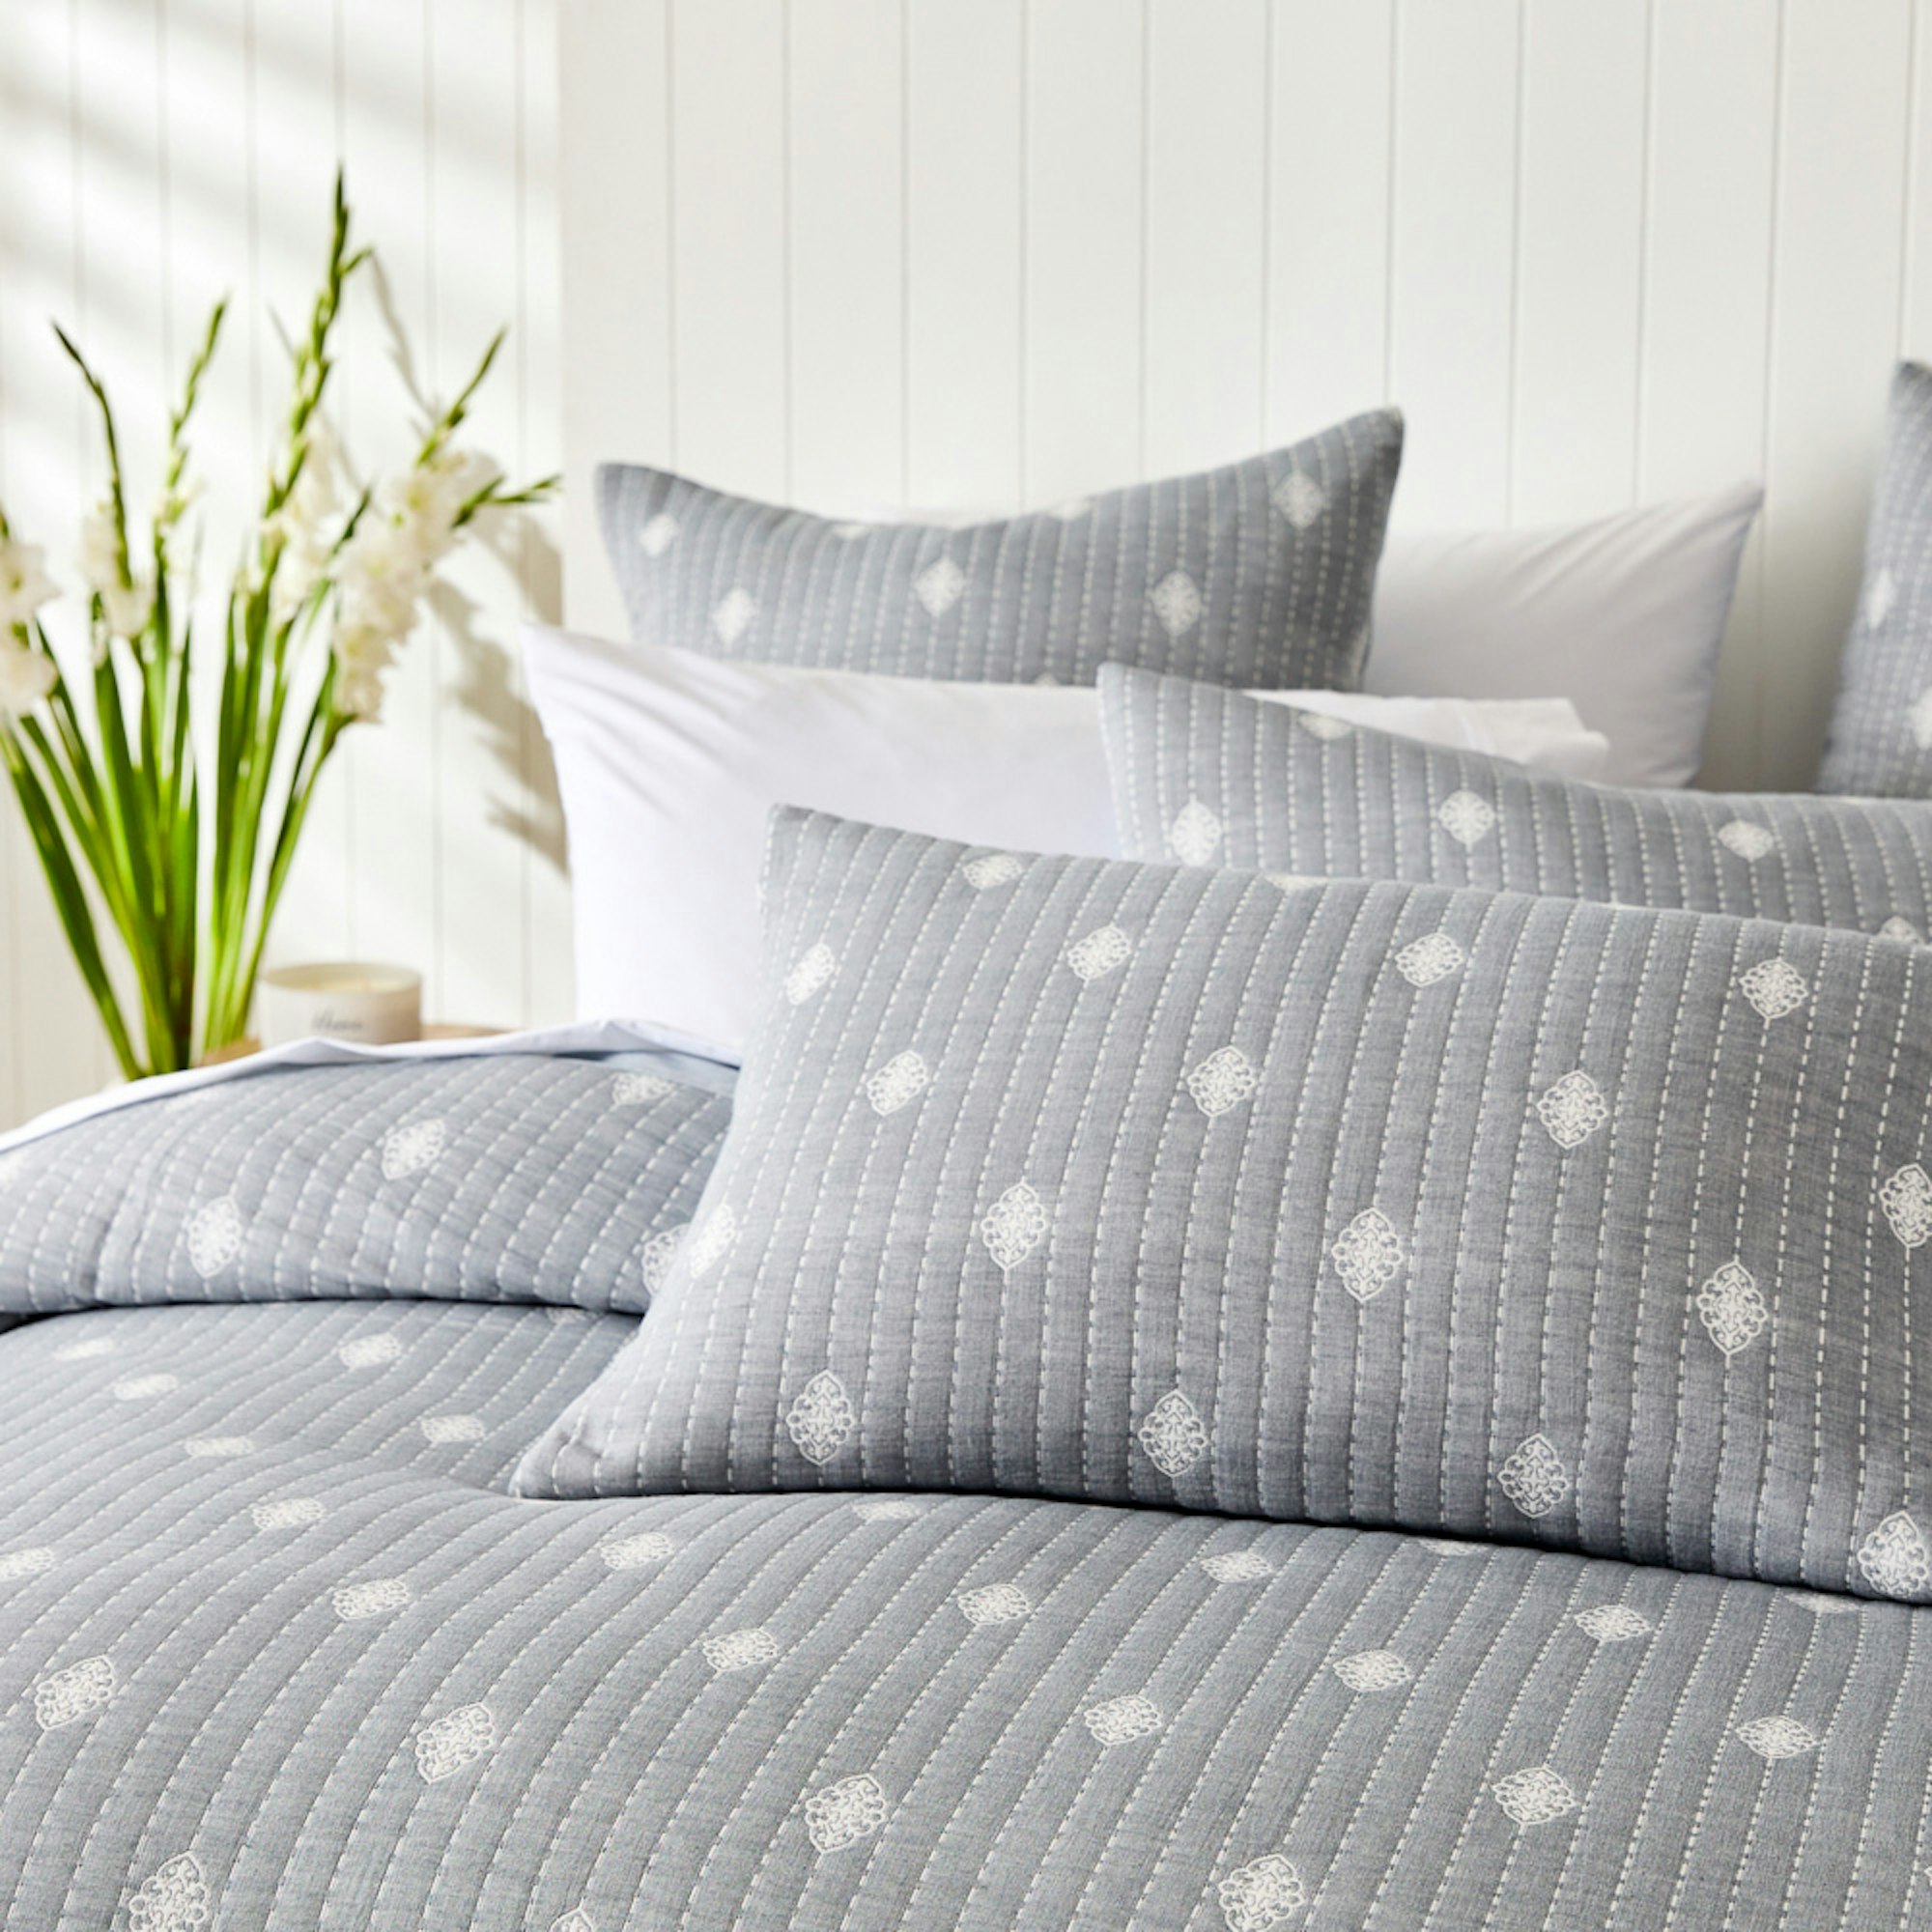 Home with Deborah Hutton SS23 coastal bedroom setting with grey quilt cover with white diamonds